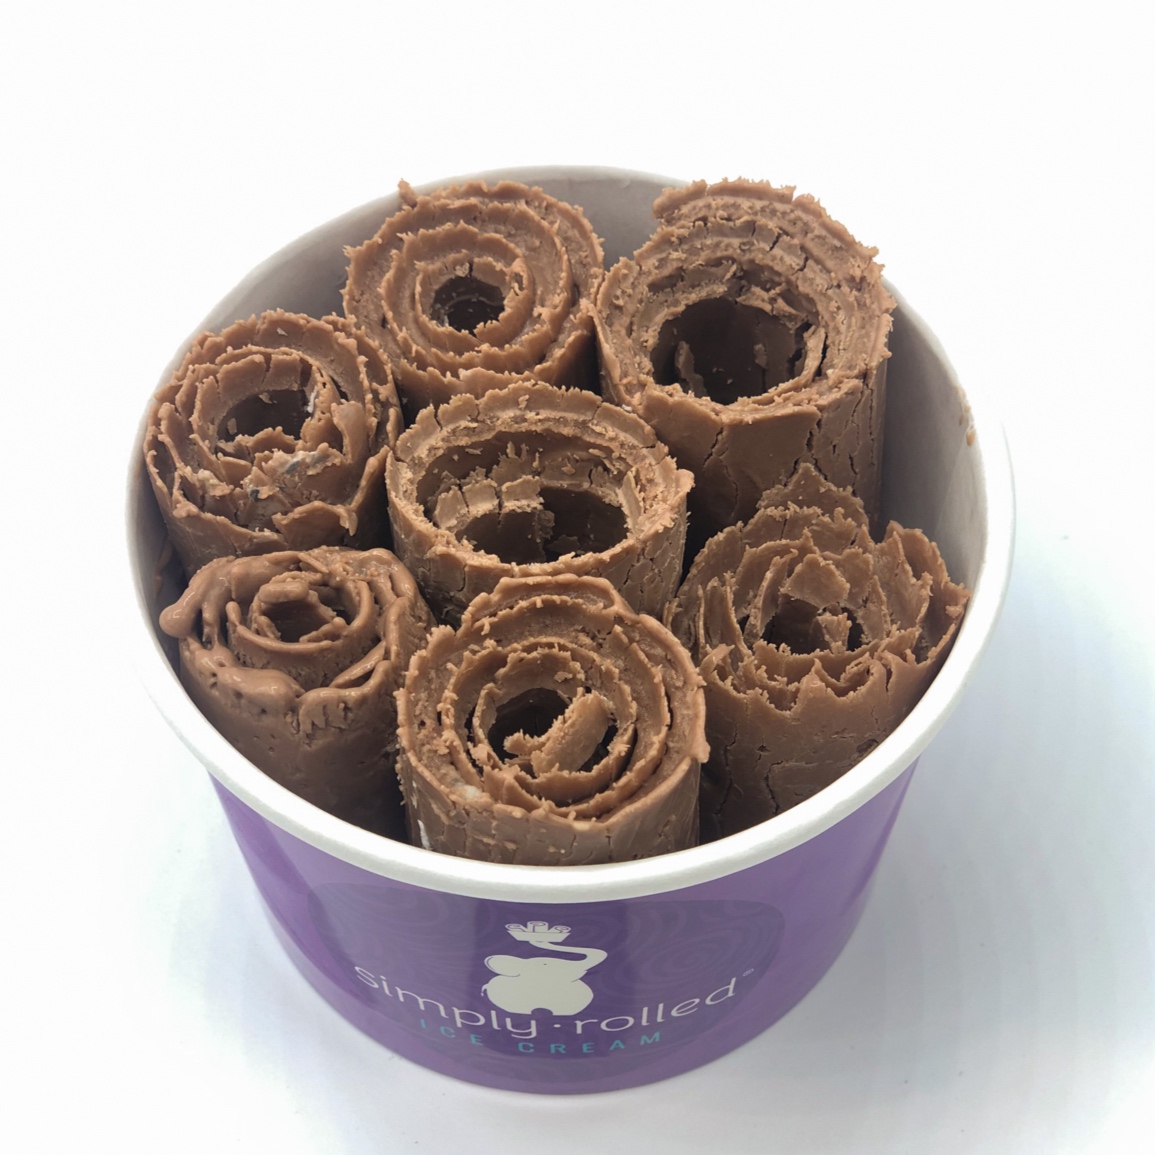 Simply Rolled Ice Cream